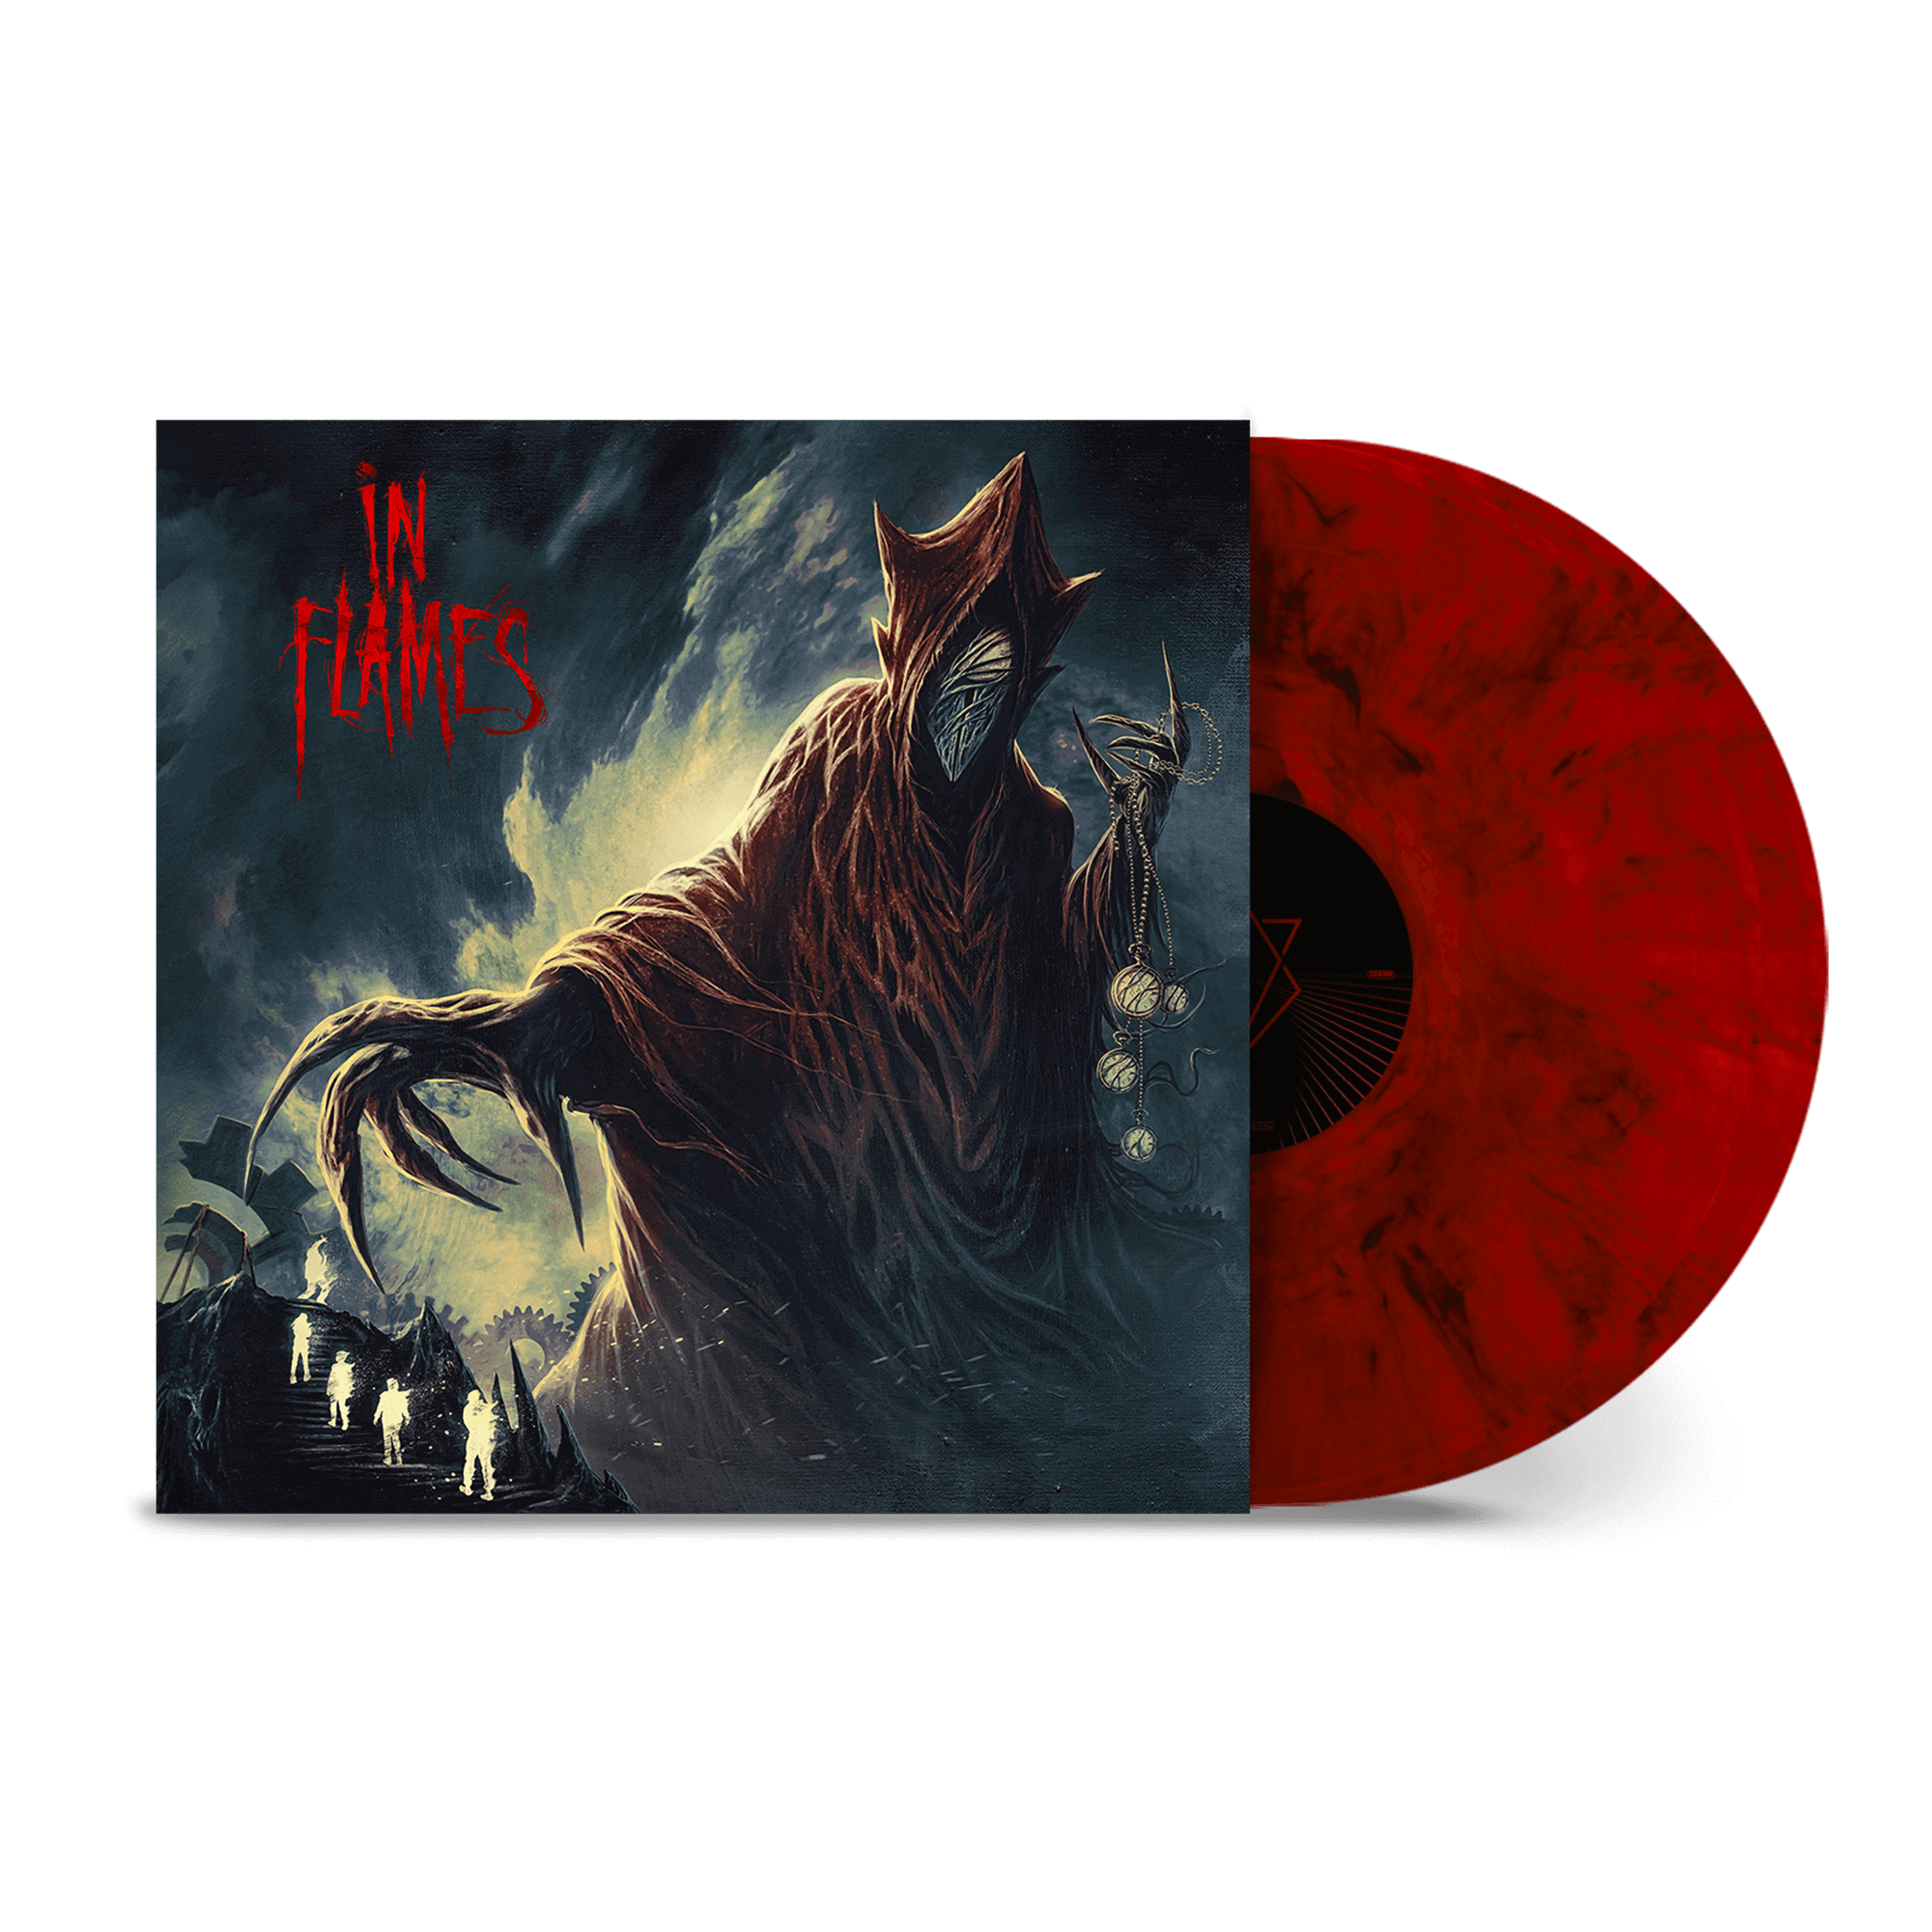 In Flames - 2LP Red + Black Marble (In Flames excl.)